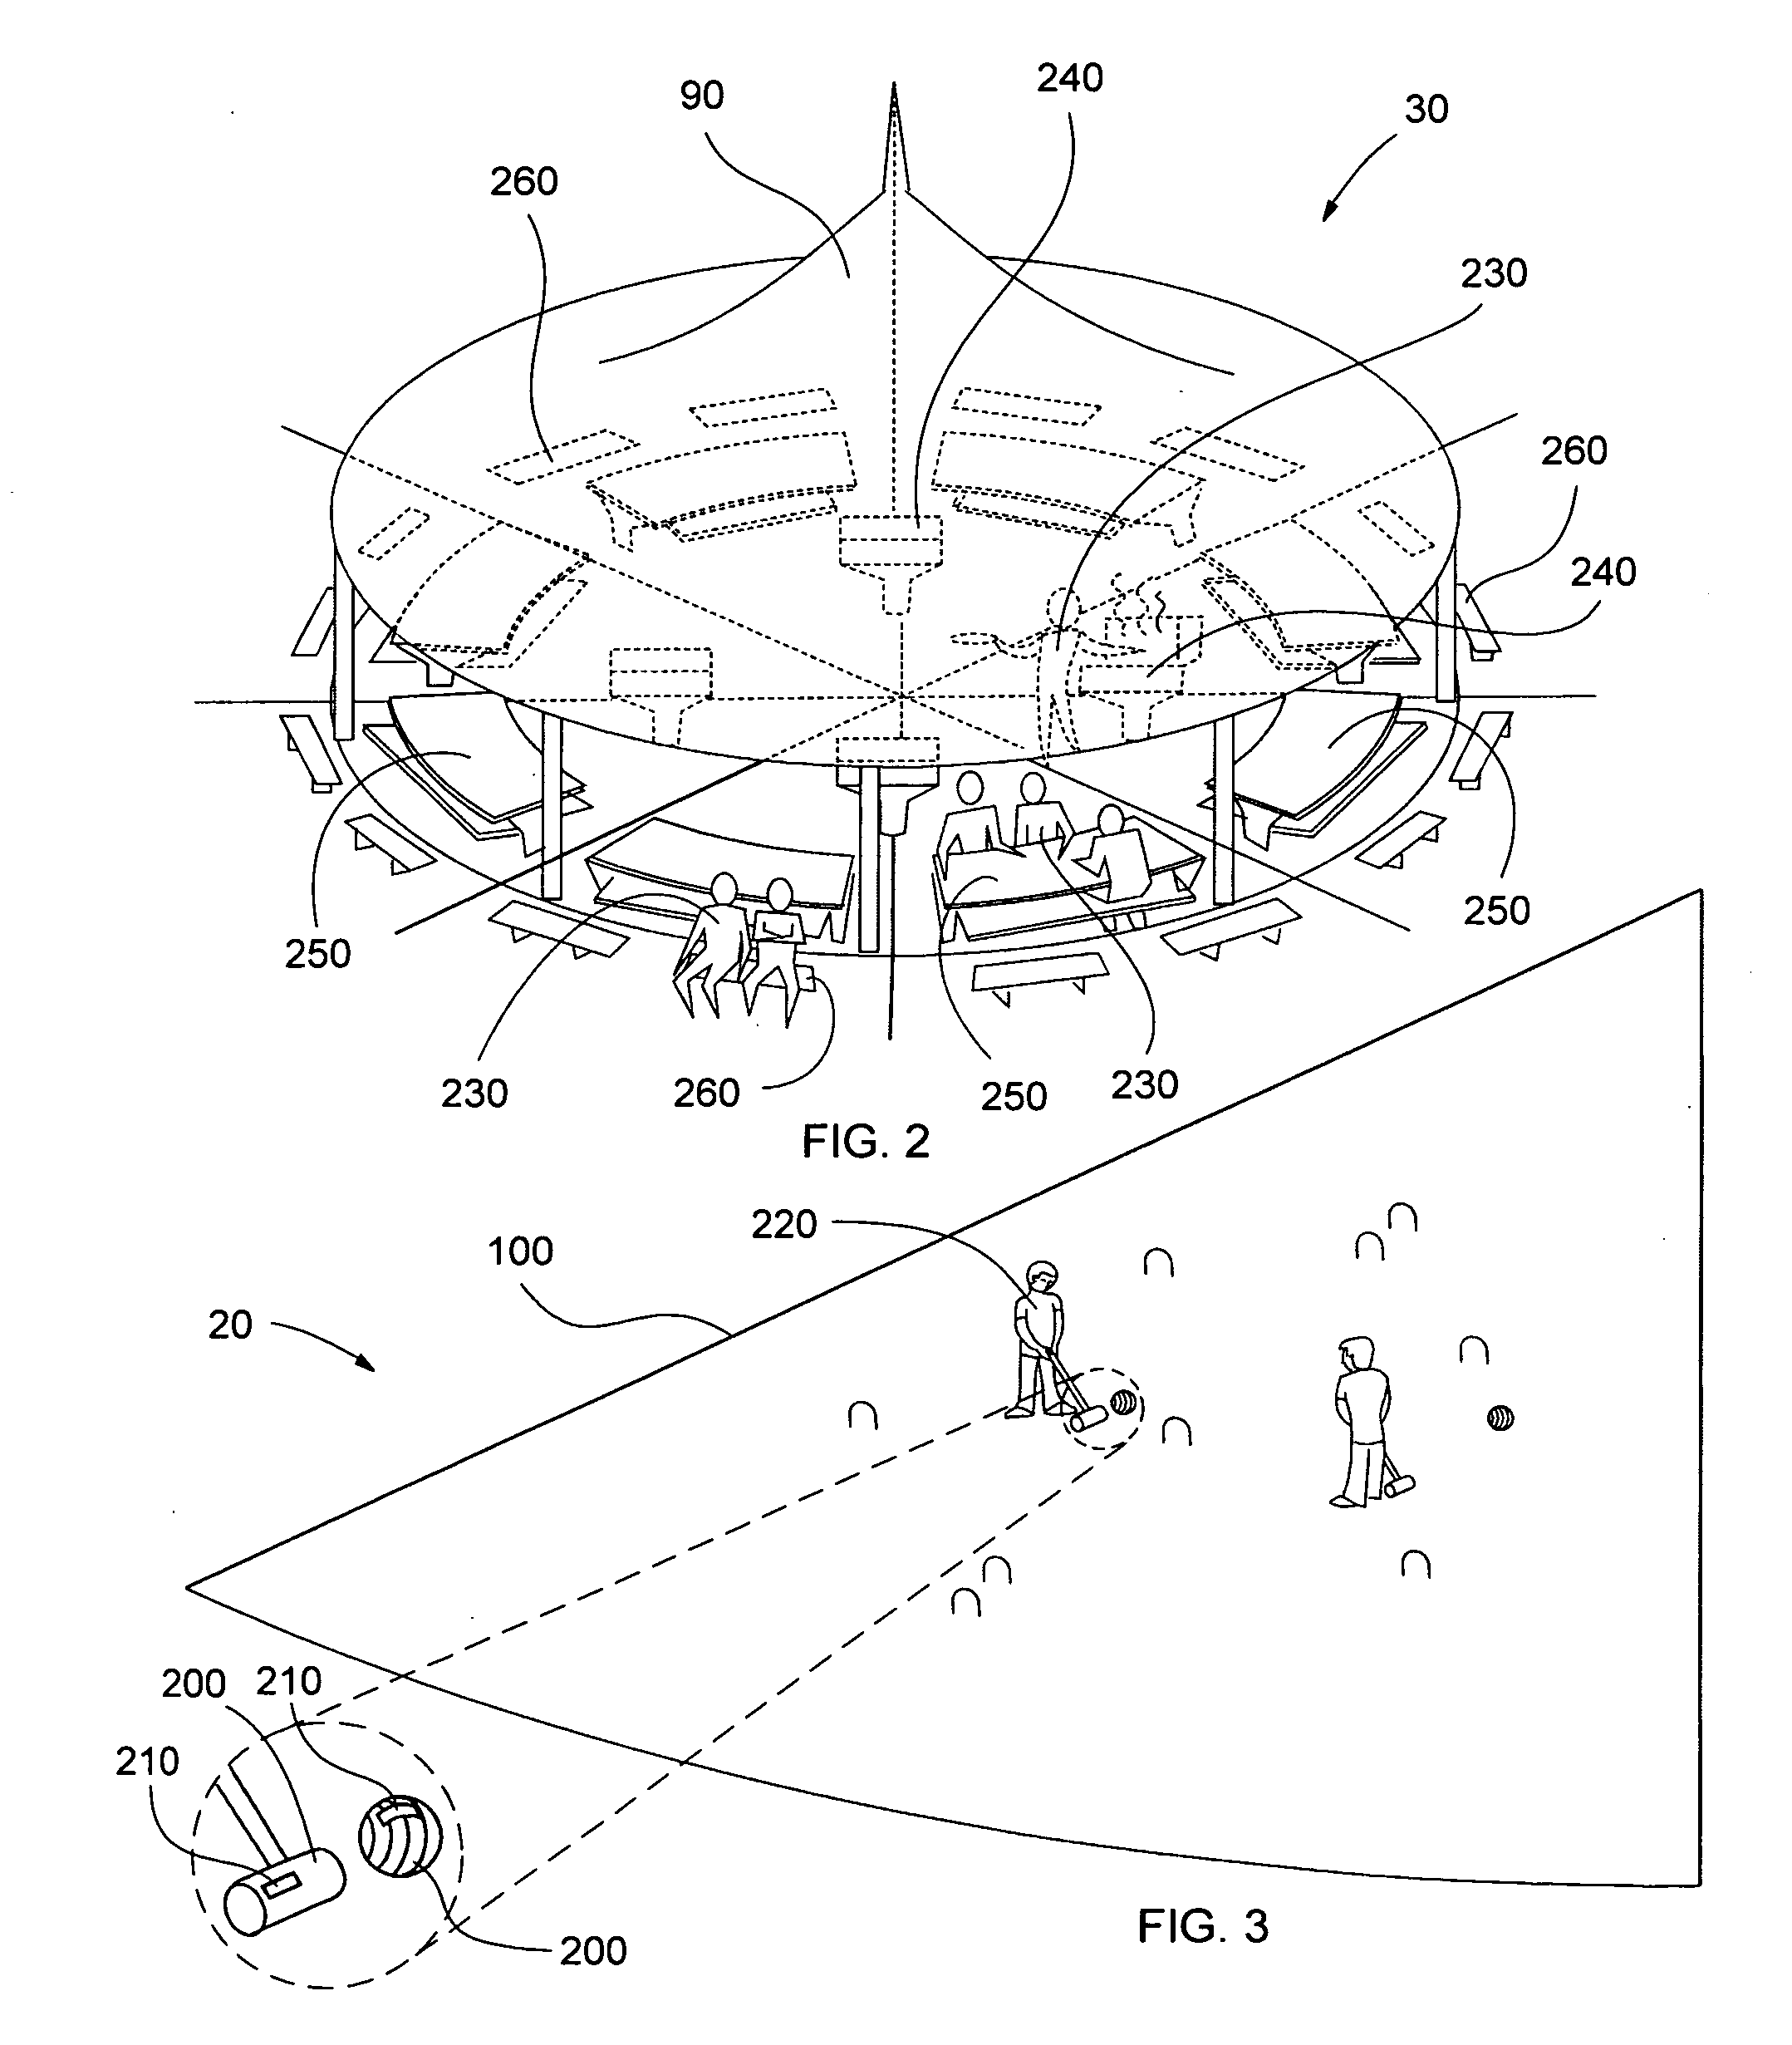 Segmented observable activity enclosure and method of use